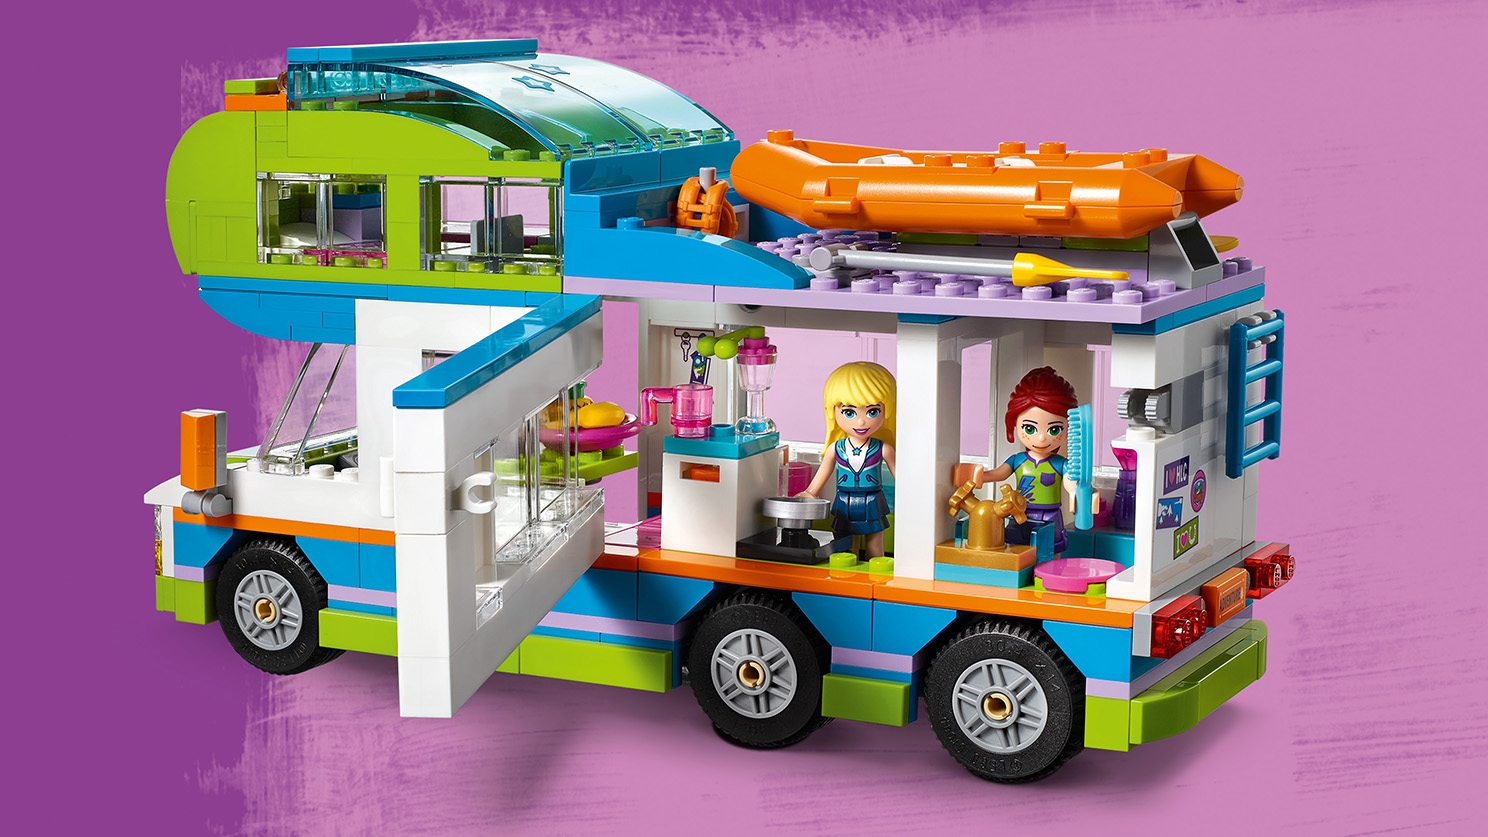 Mia and Stephanie Mini Dolls LEGO 41339 Friends Heartlake Mia’s Camper Van Playset Build and Play Fun Toys for Kids